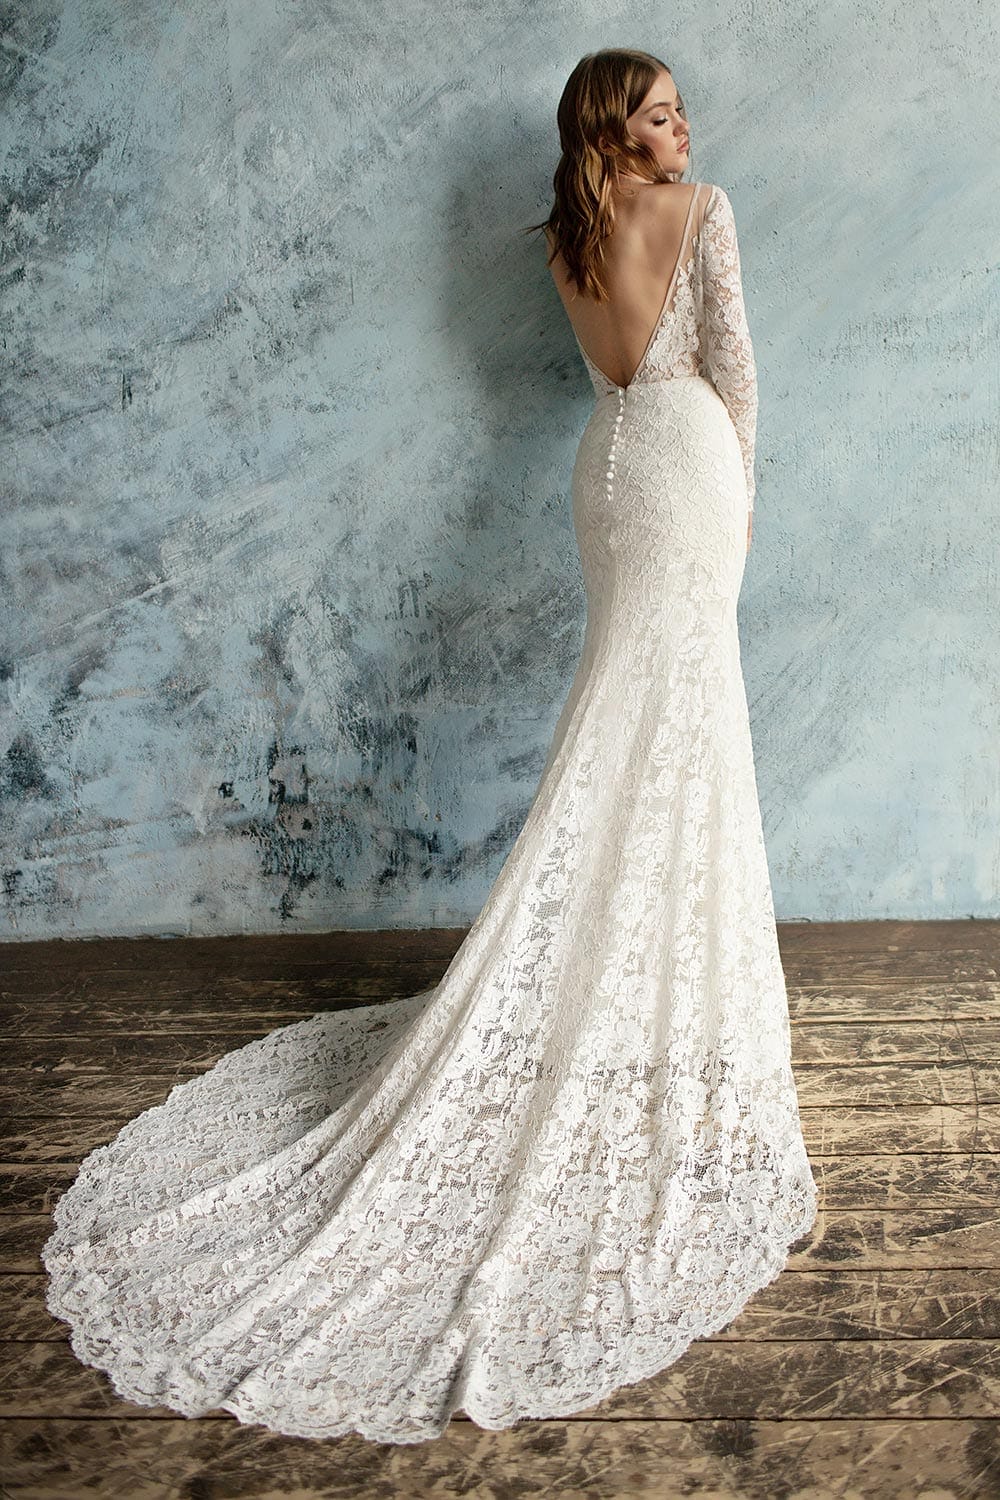 Lace Wedding Dresses — Heart to Heart Bride | Rochester, NY Bridal Shop